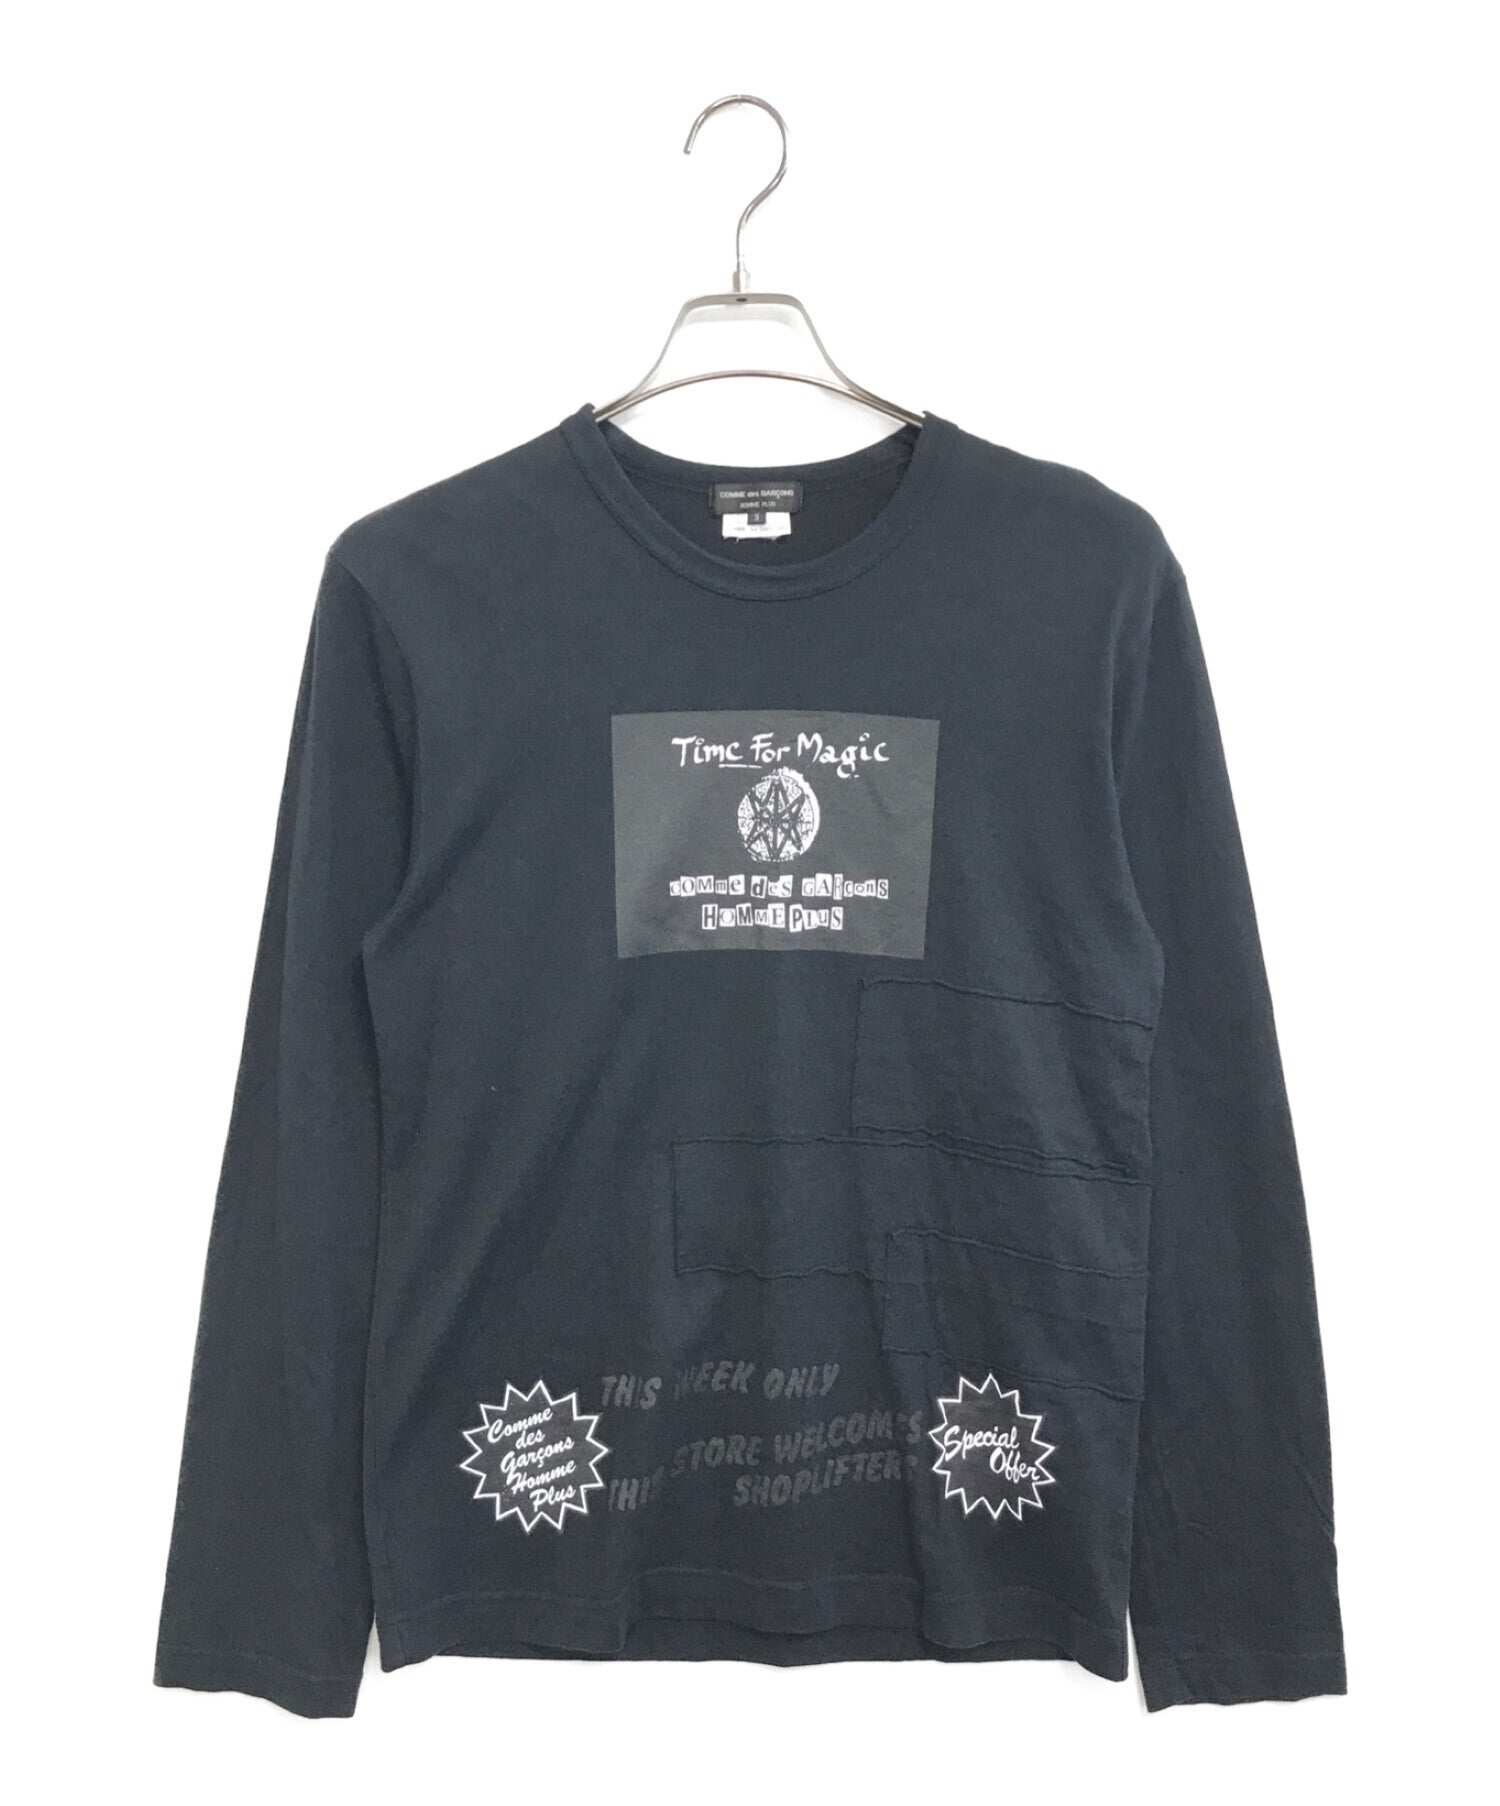 COMME des GARCONS HOMME PLUS long-sleeved cut-and-sew PB-T035